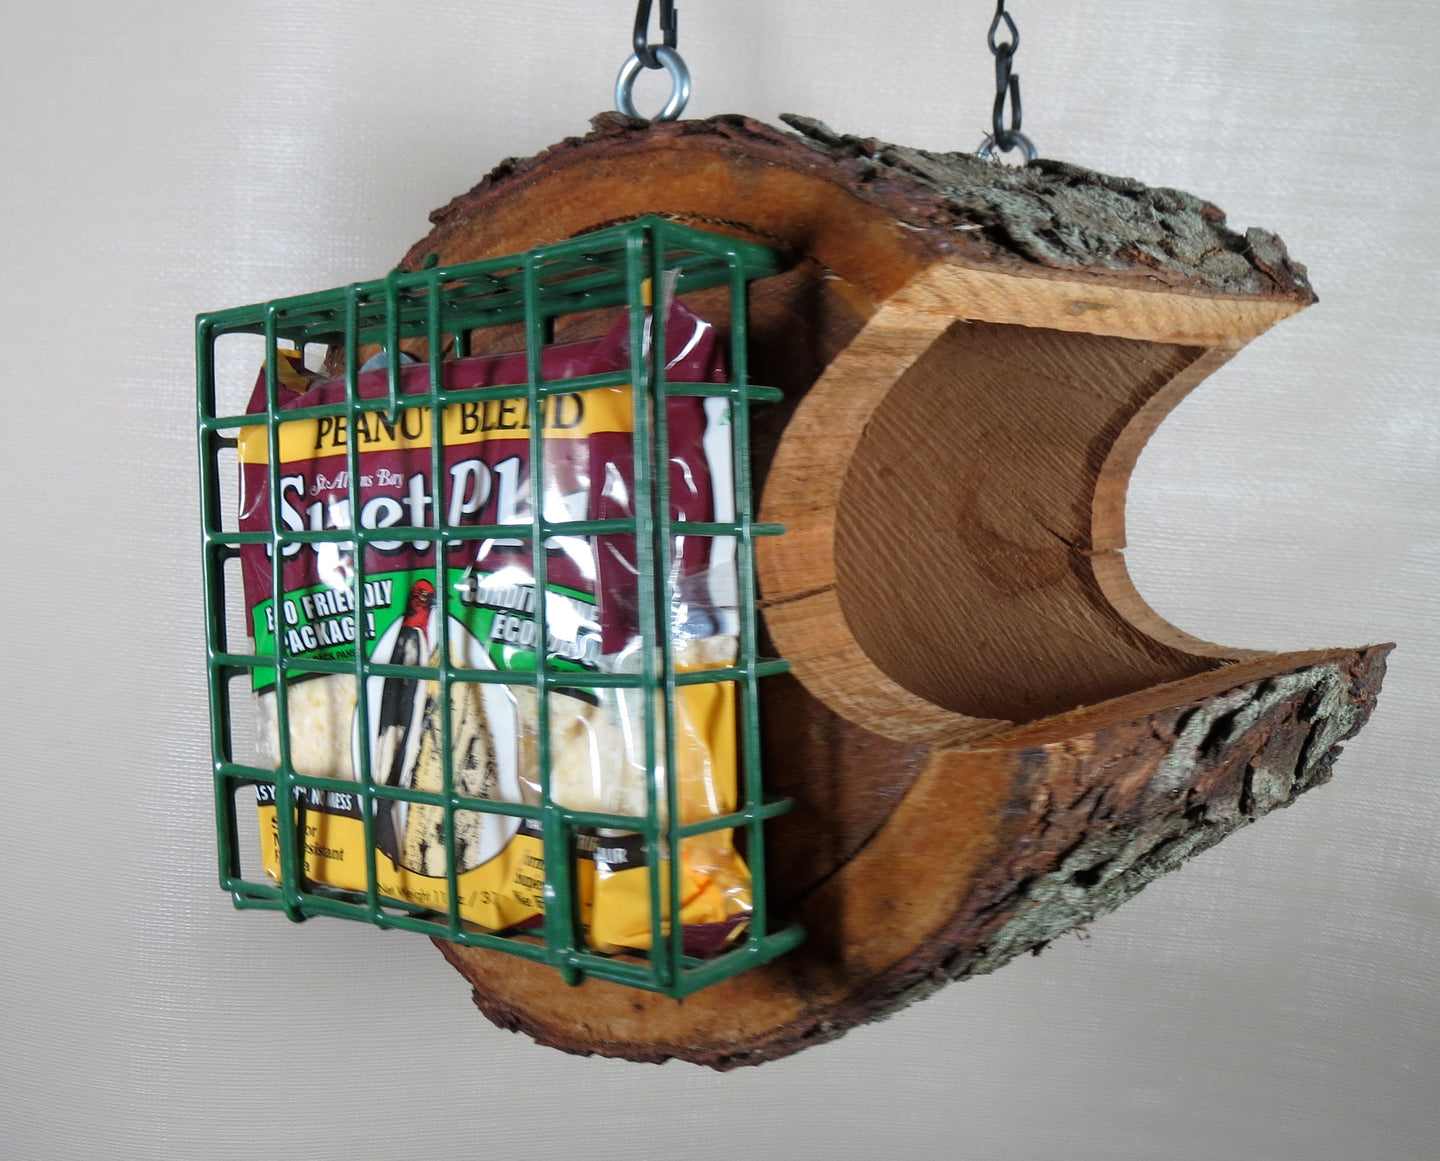 Log seed & Suet bird feeder, created and designed by Schoolhouse Woodcrafts